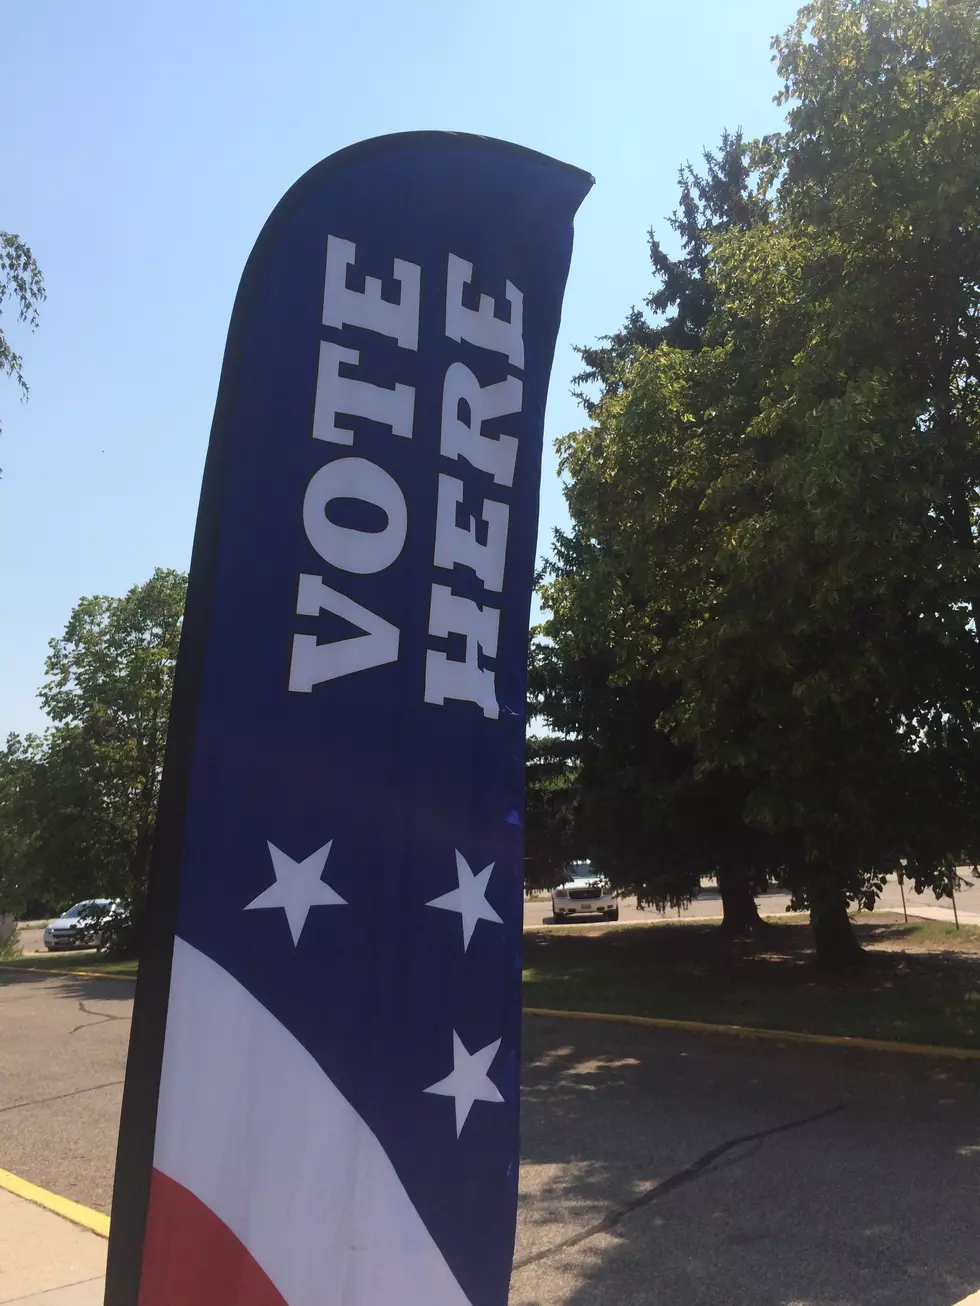 Long Lines, Friendly People: My Voting Experience In Cheyenne